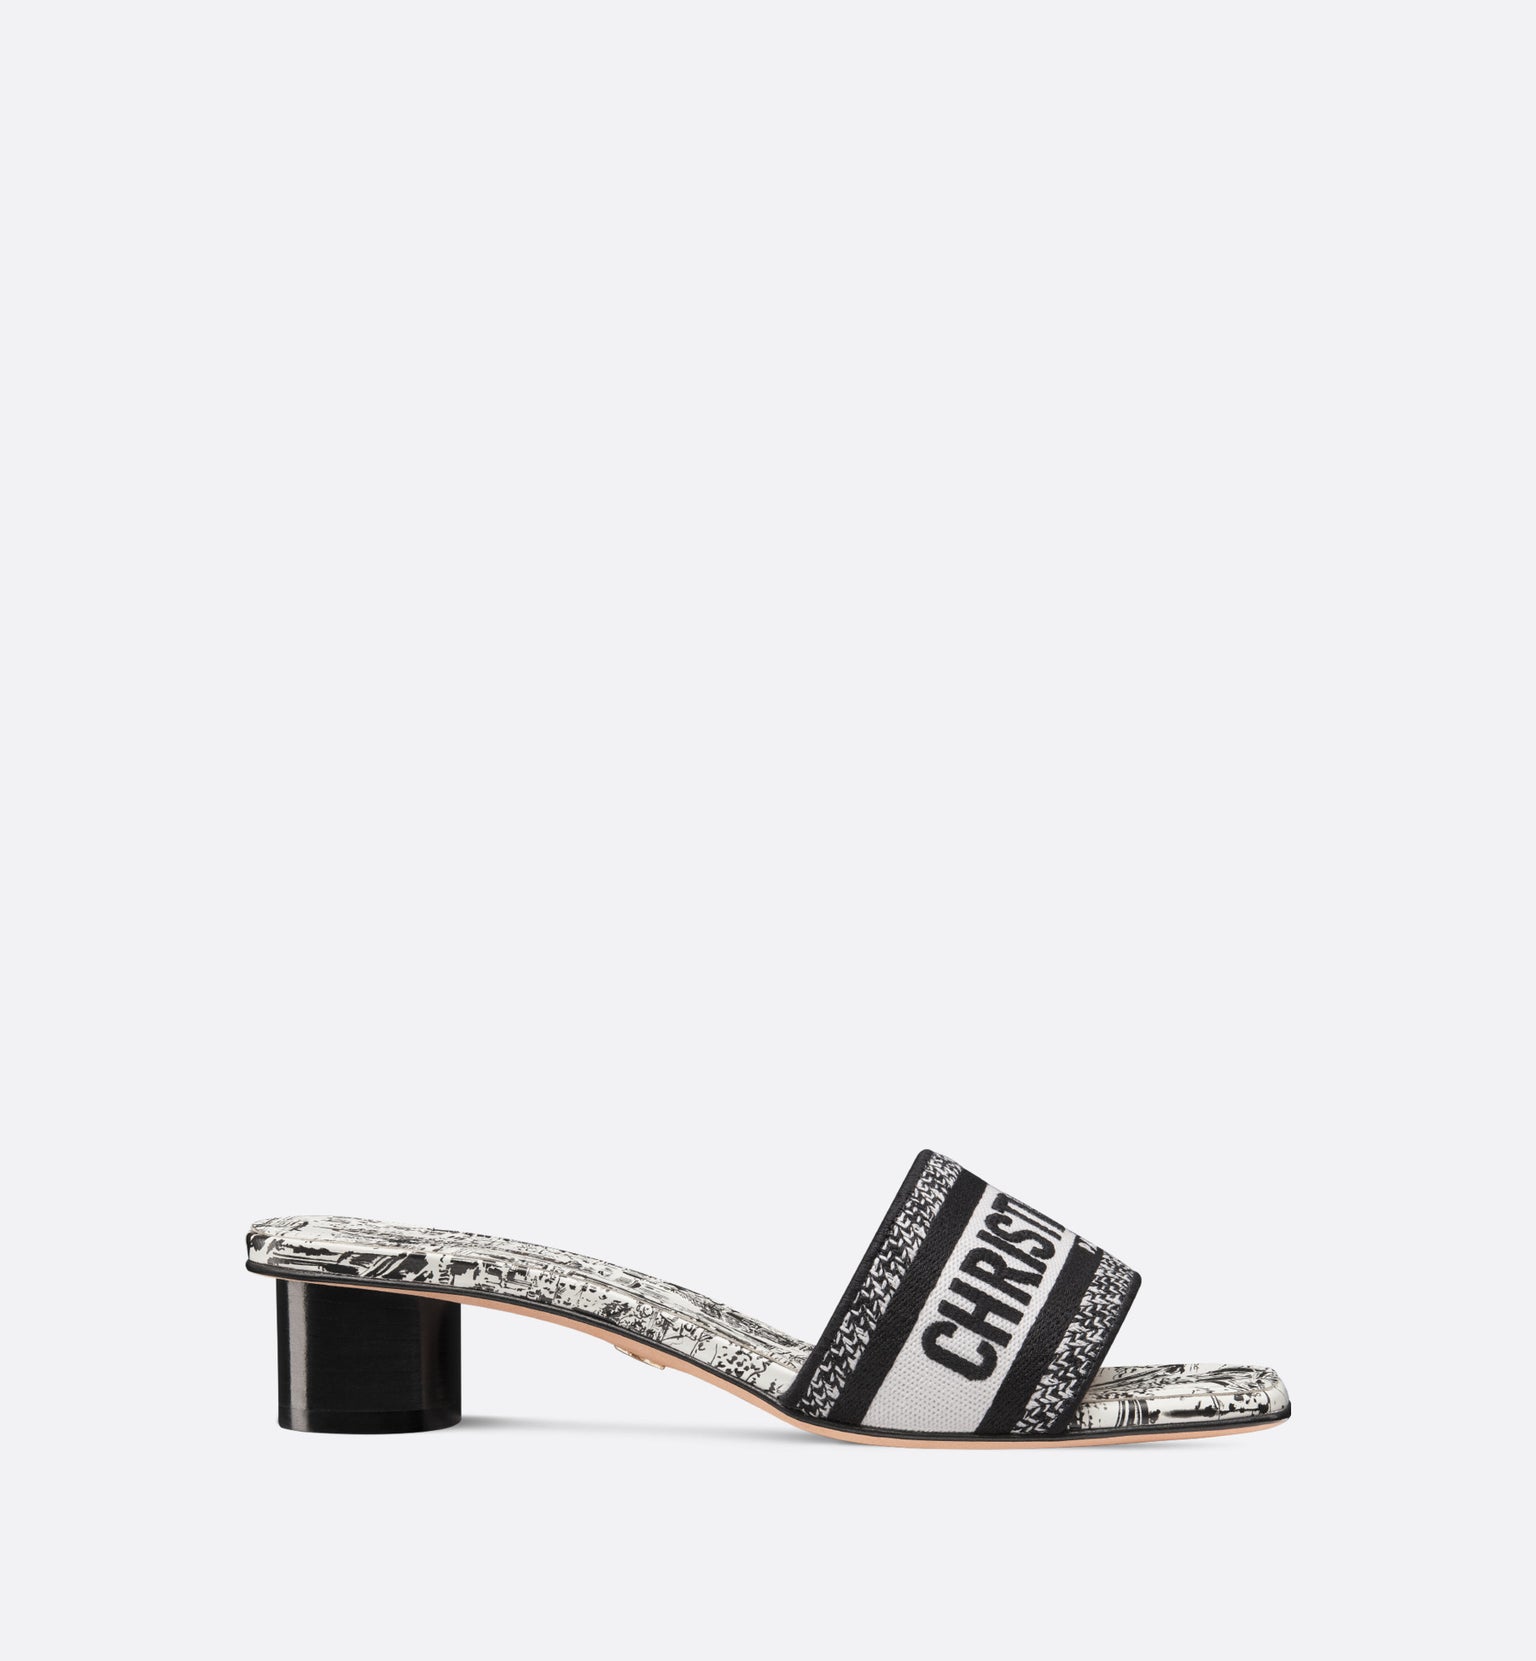 Dway Heeled Slide • Cotton Embroidered with White and Black Paris Allover Motif